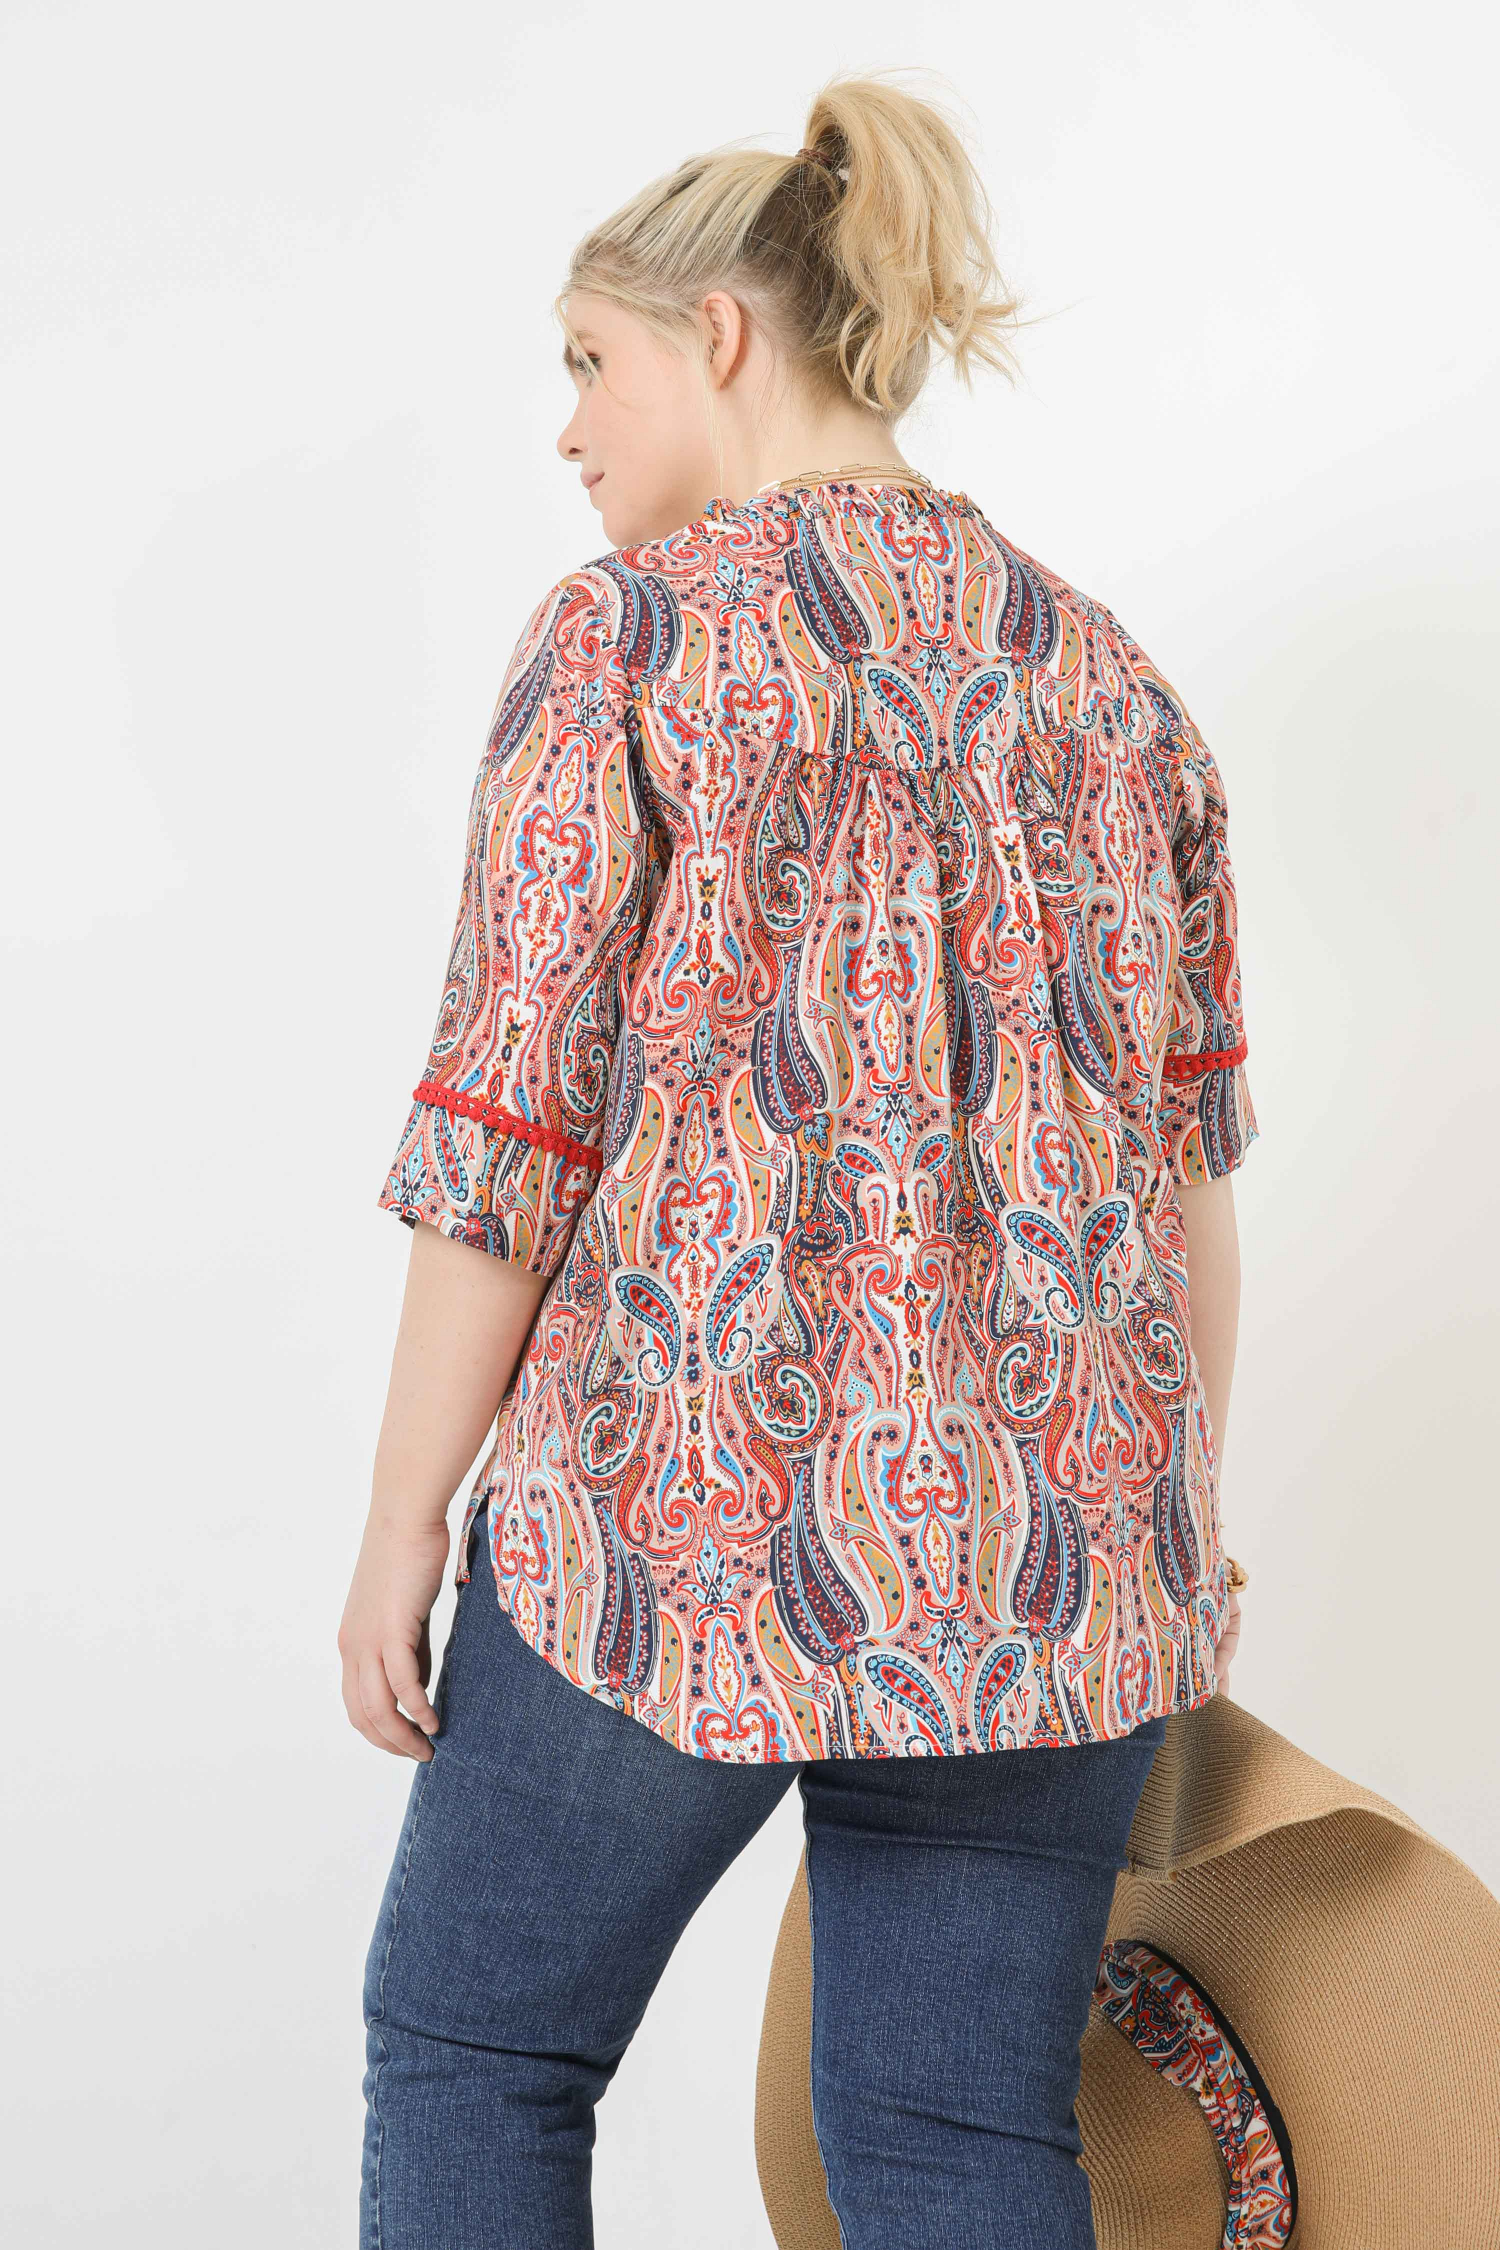 V-neck printed blouse in éco-responsable fabric